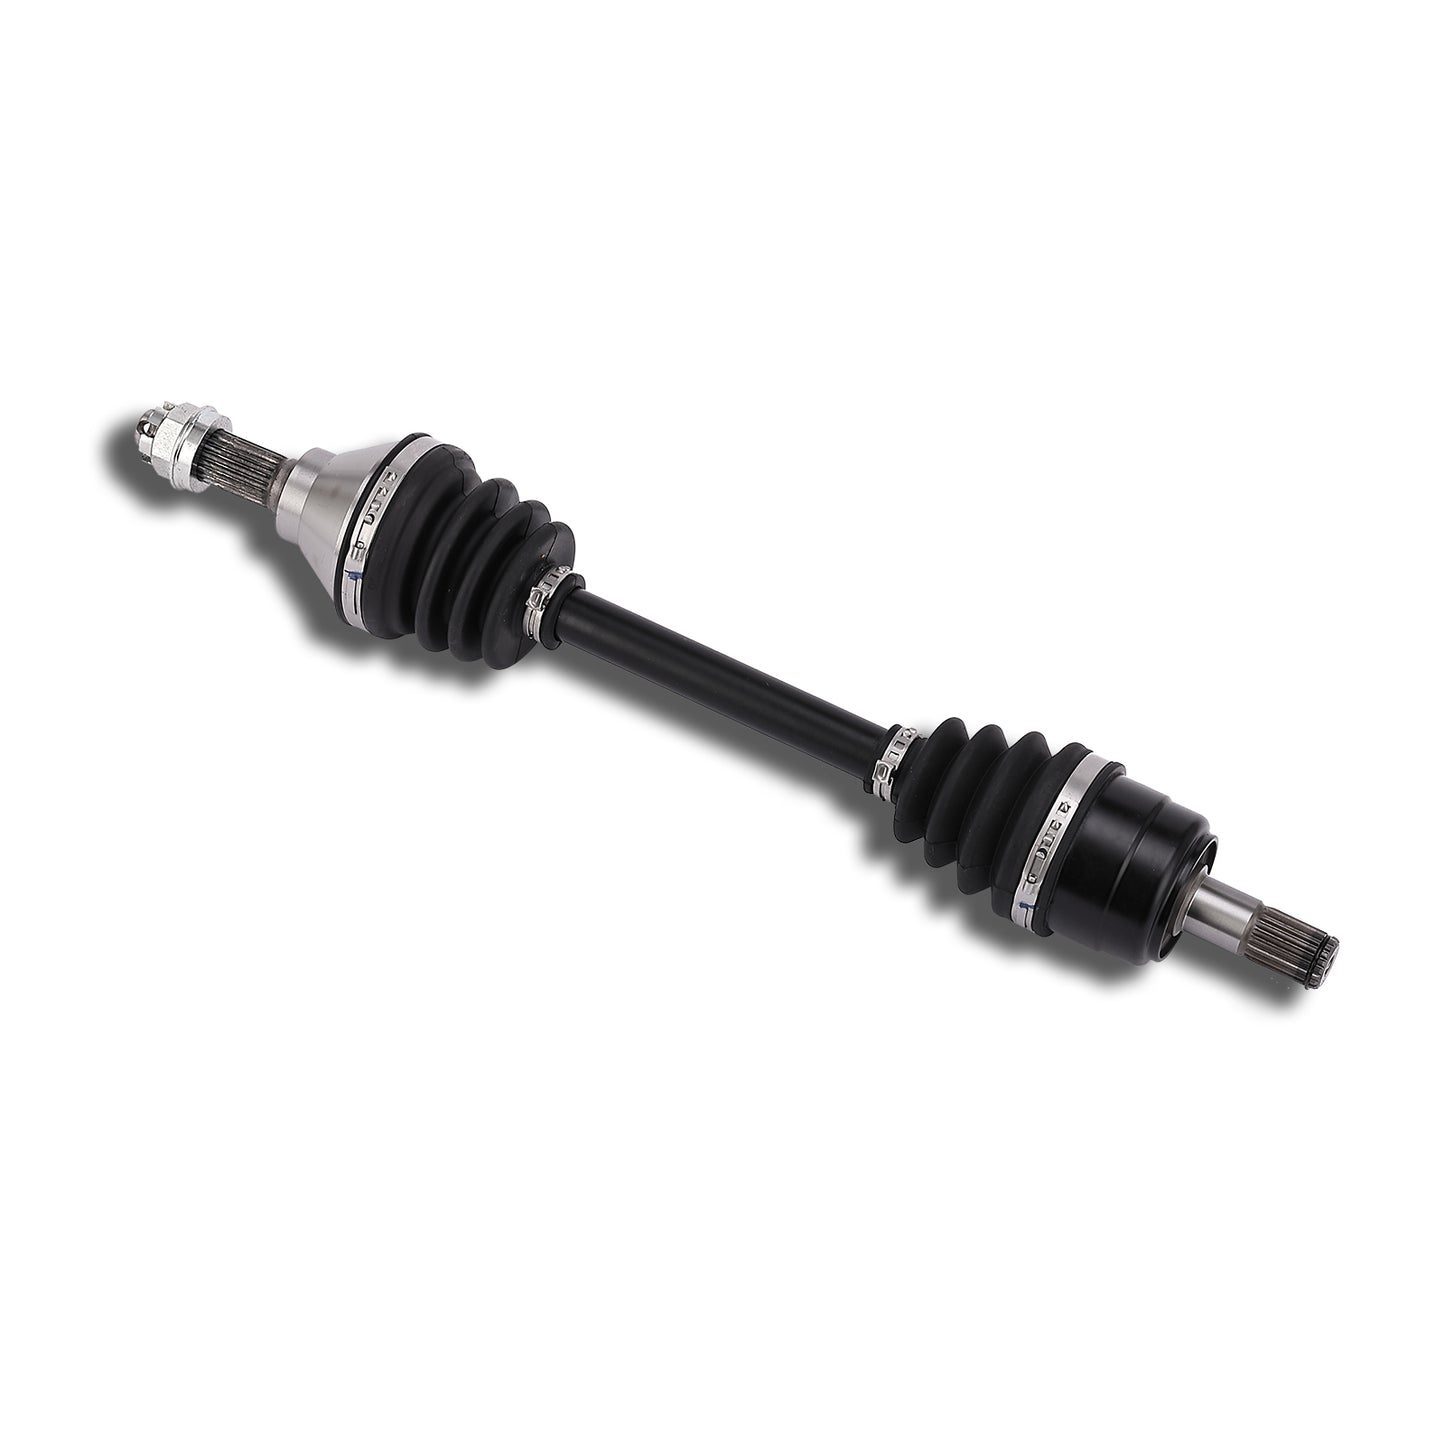 1 CAM-KW124 and 1 CAM-KW224 Front Left Drive Shaft CV Axle Compatible with KAWASAKI (2006-2013) Brute Force 650i LF / (2005-2021) Brute Force 750i LF 59266-0024 59266-0032